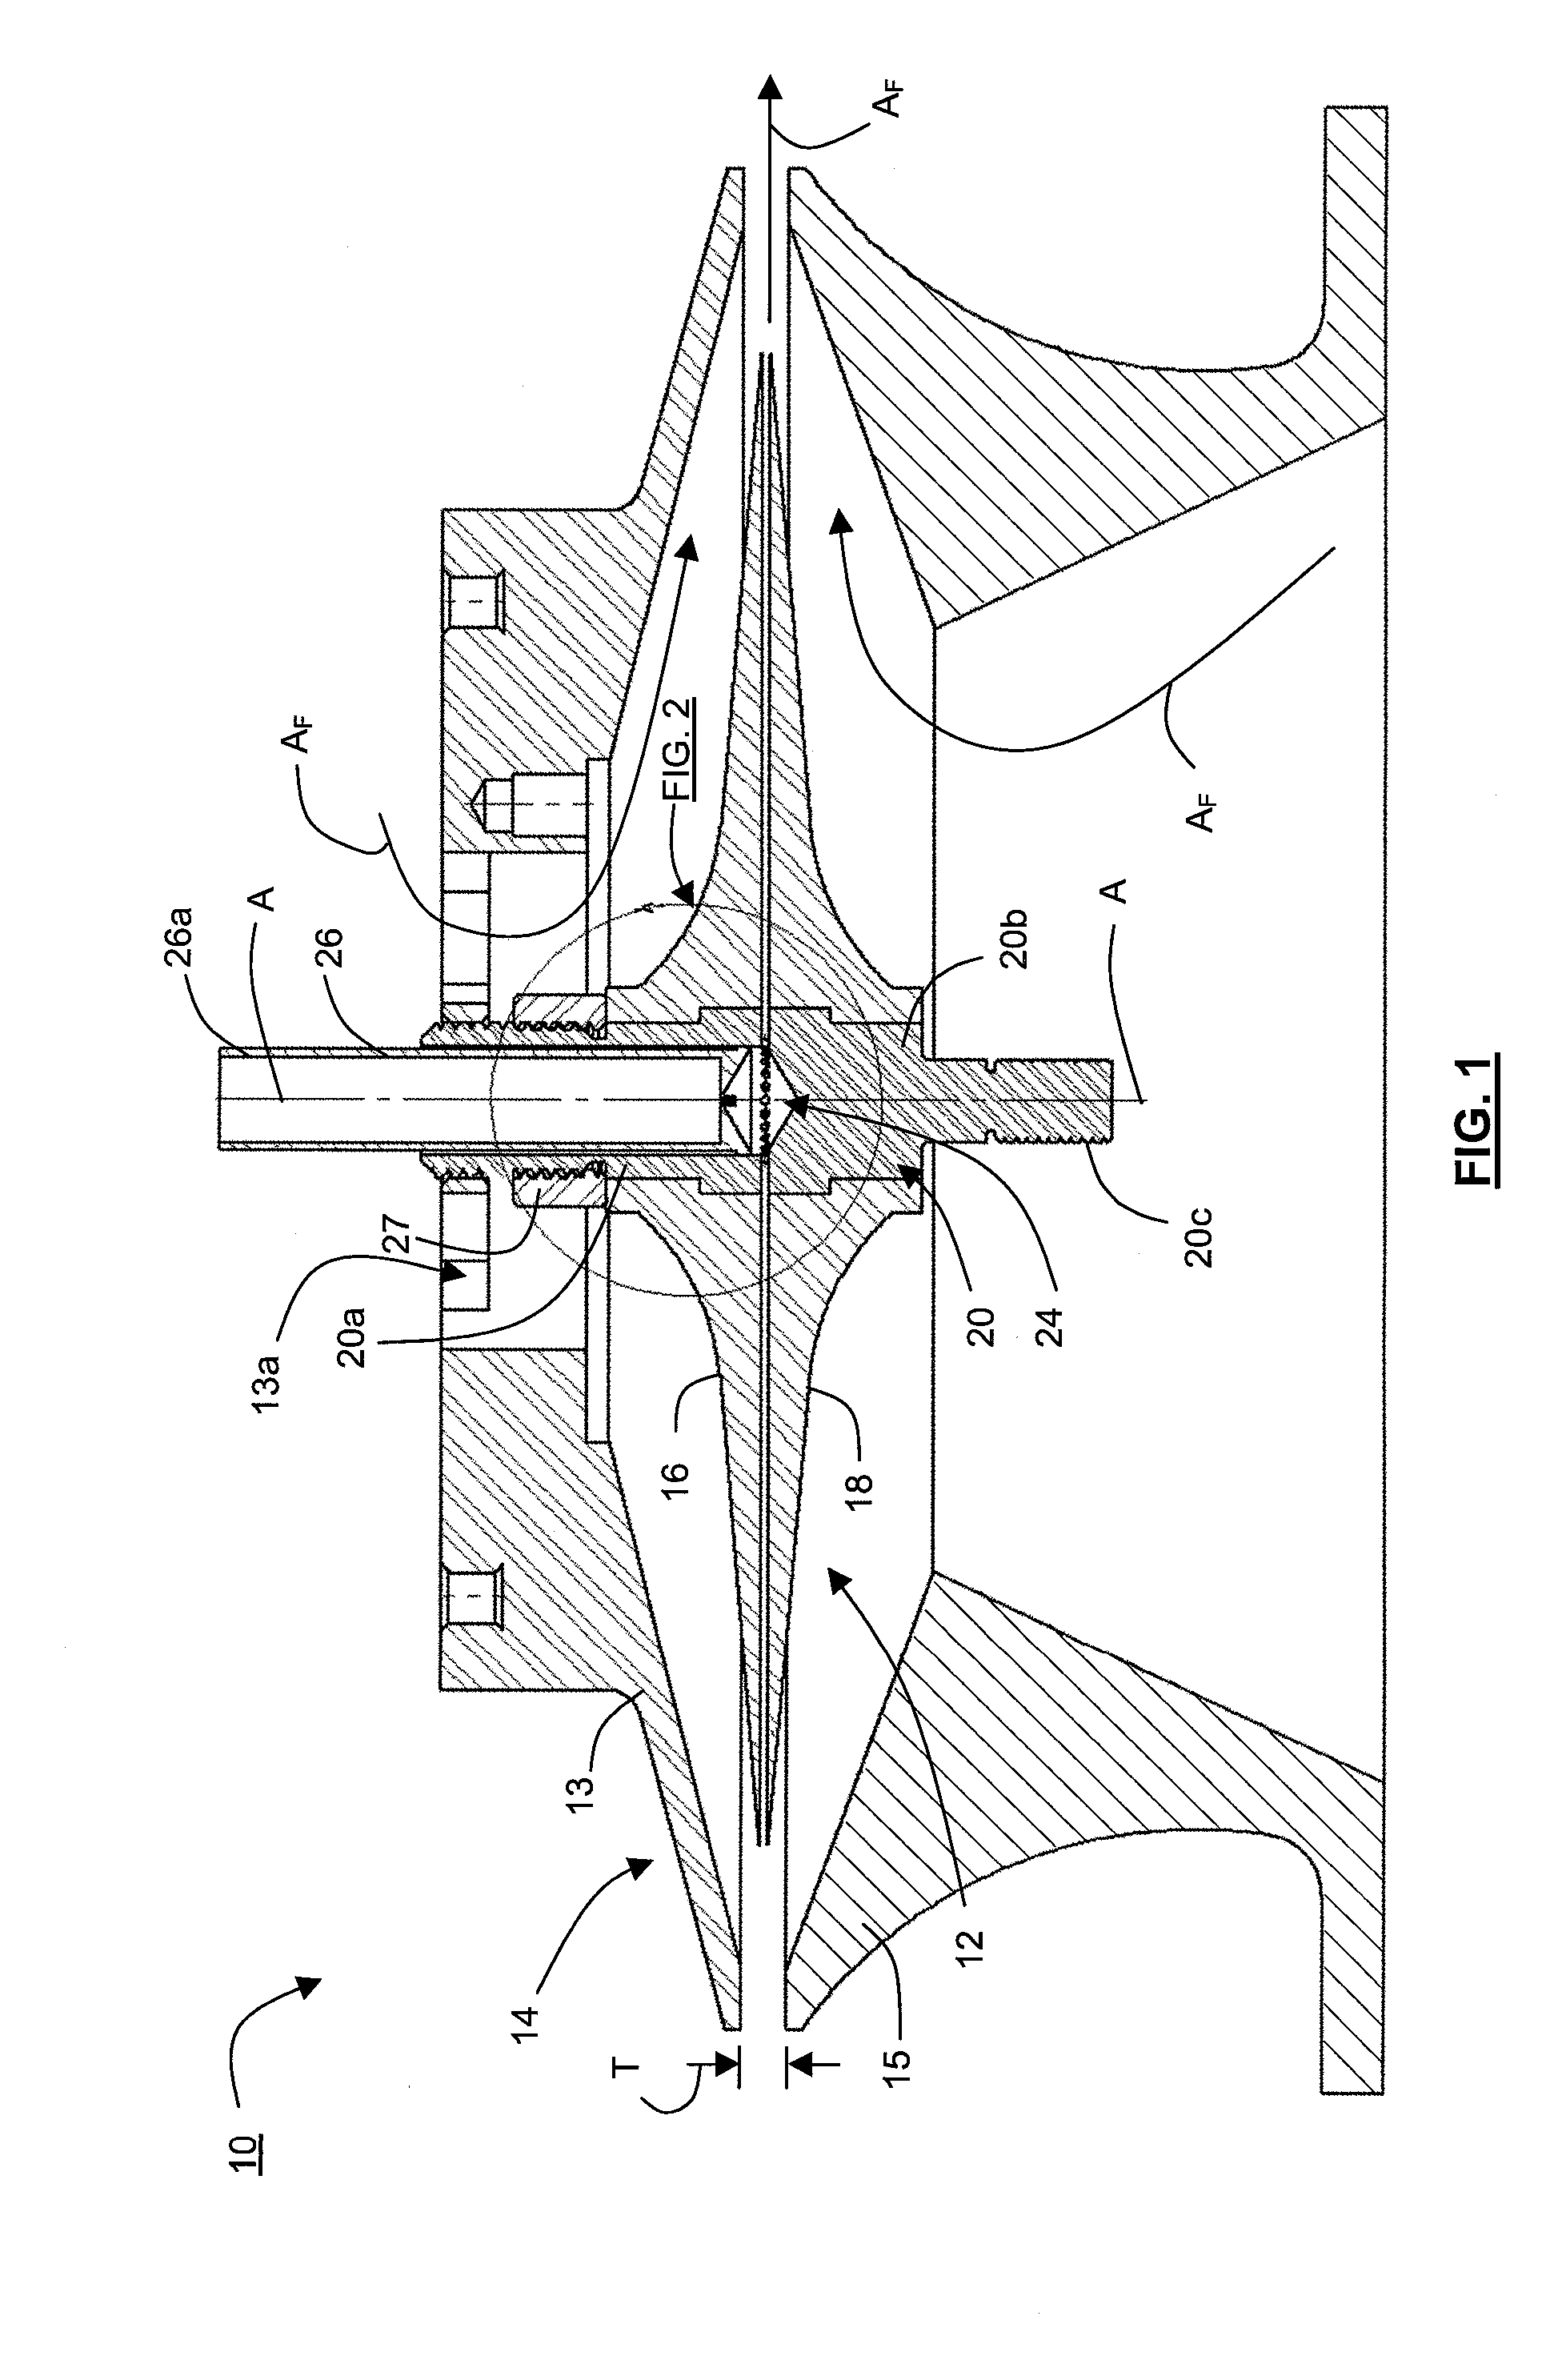 Apparatus, systems and methods for producing particles using rotating capillaries